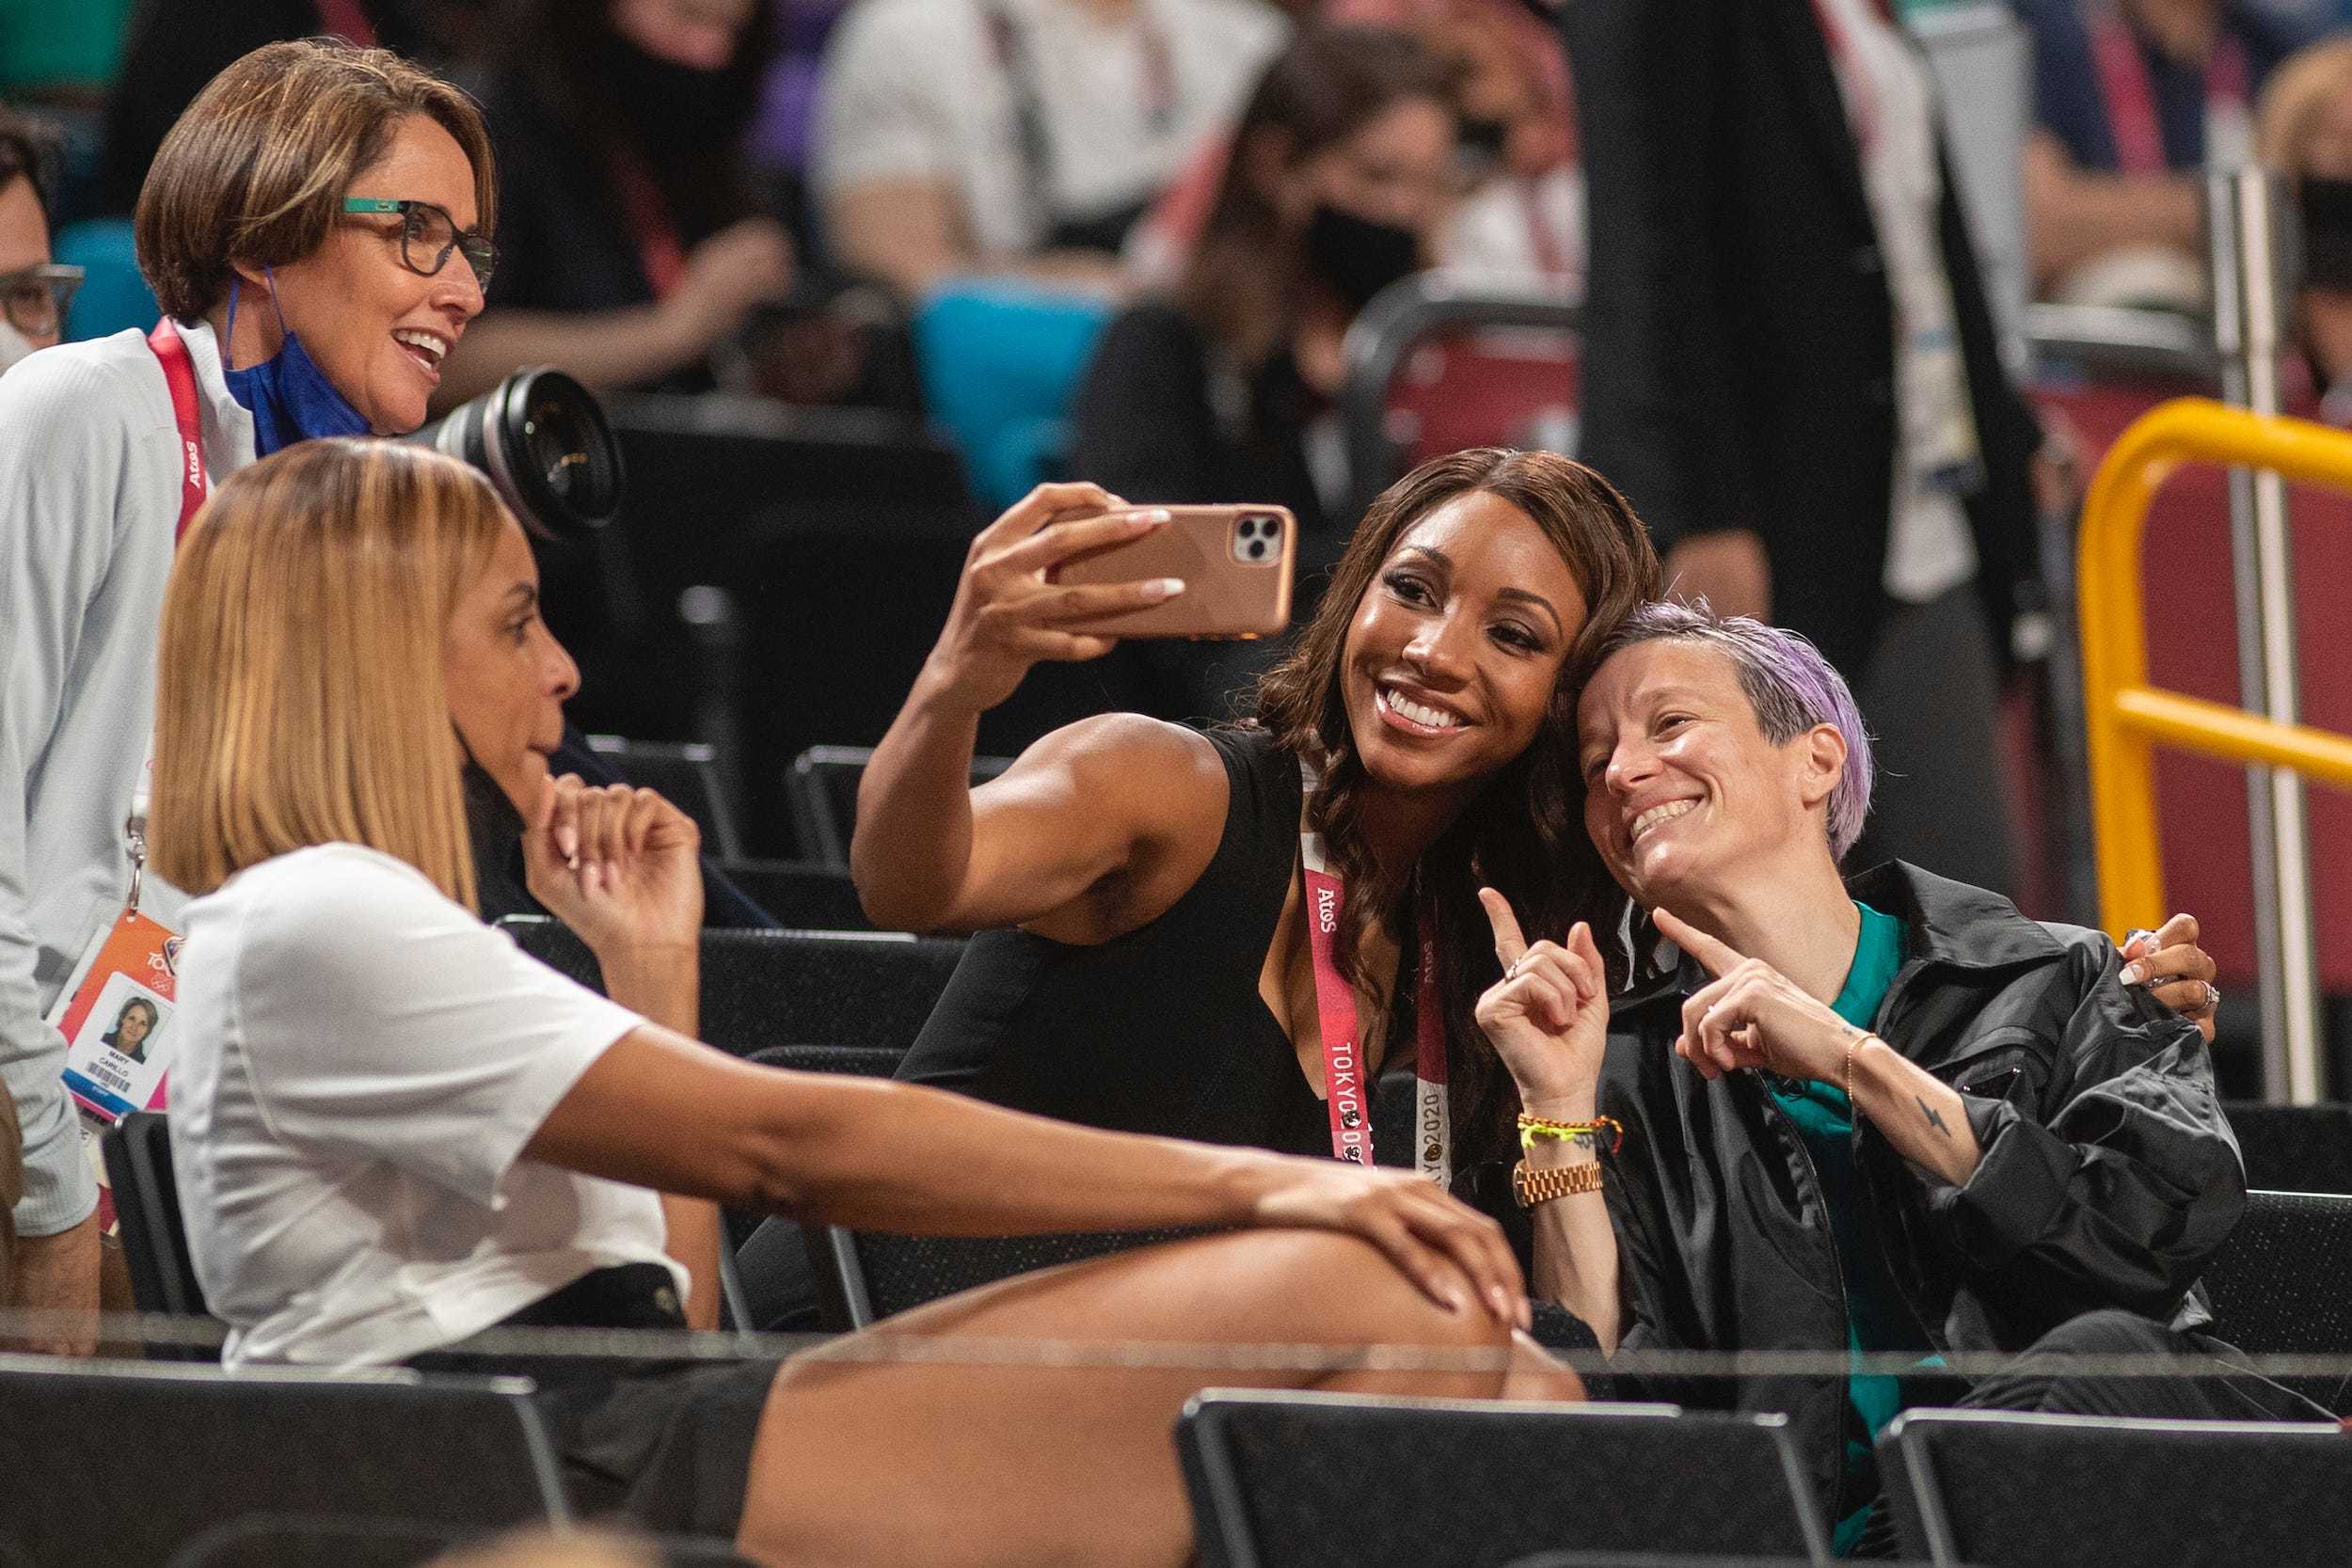 Mary Carillo, LaChina Robinson, Maria Taylor, and Megan Rapinoe sit in the stands.